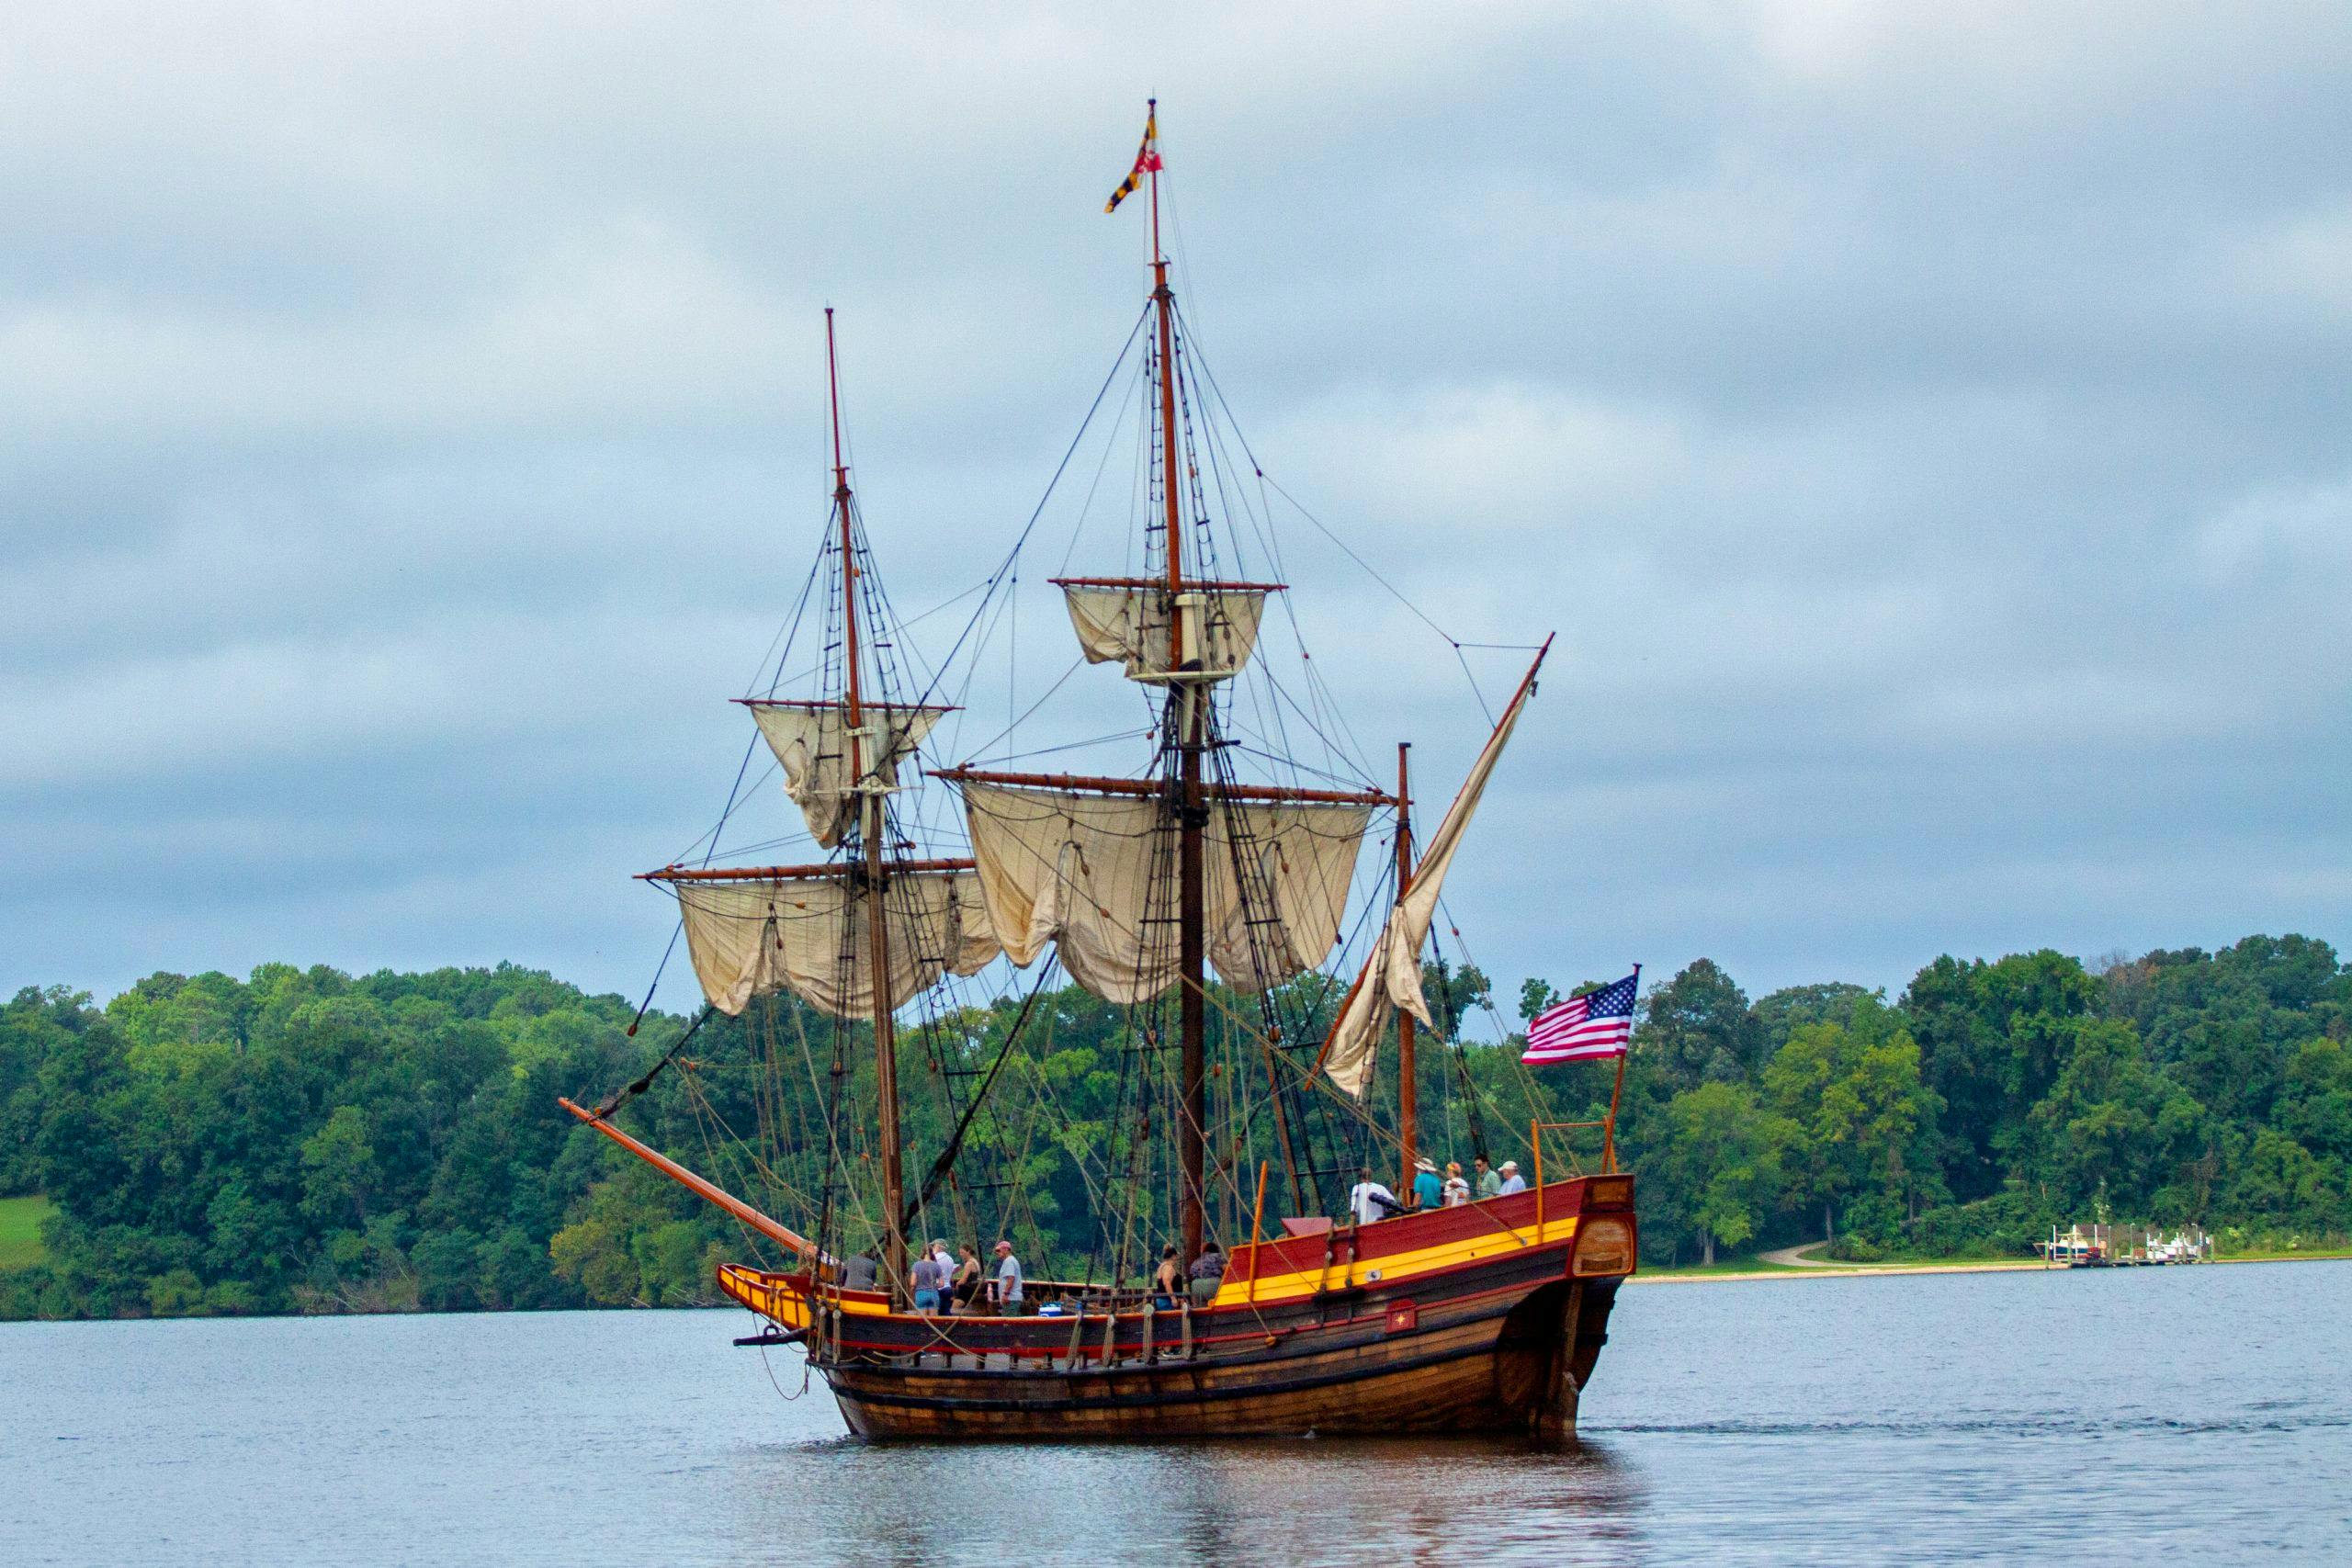 Maryland Dove away for “Blessing of the Fleet”